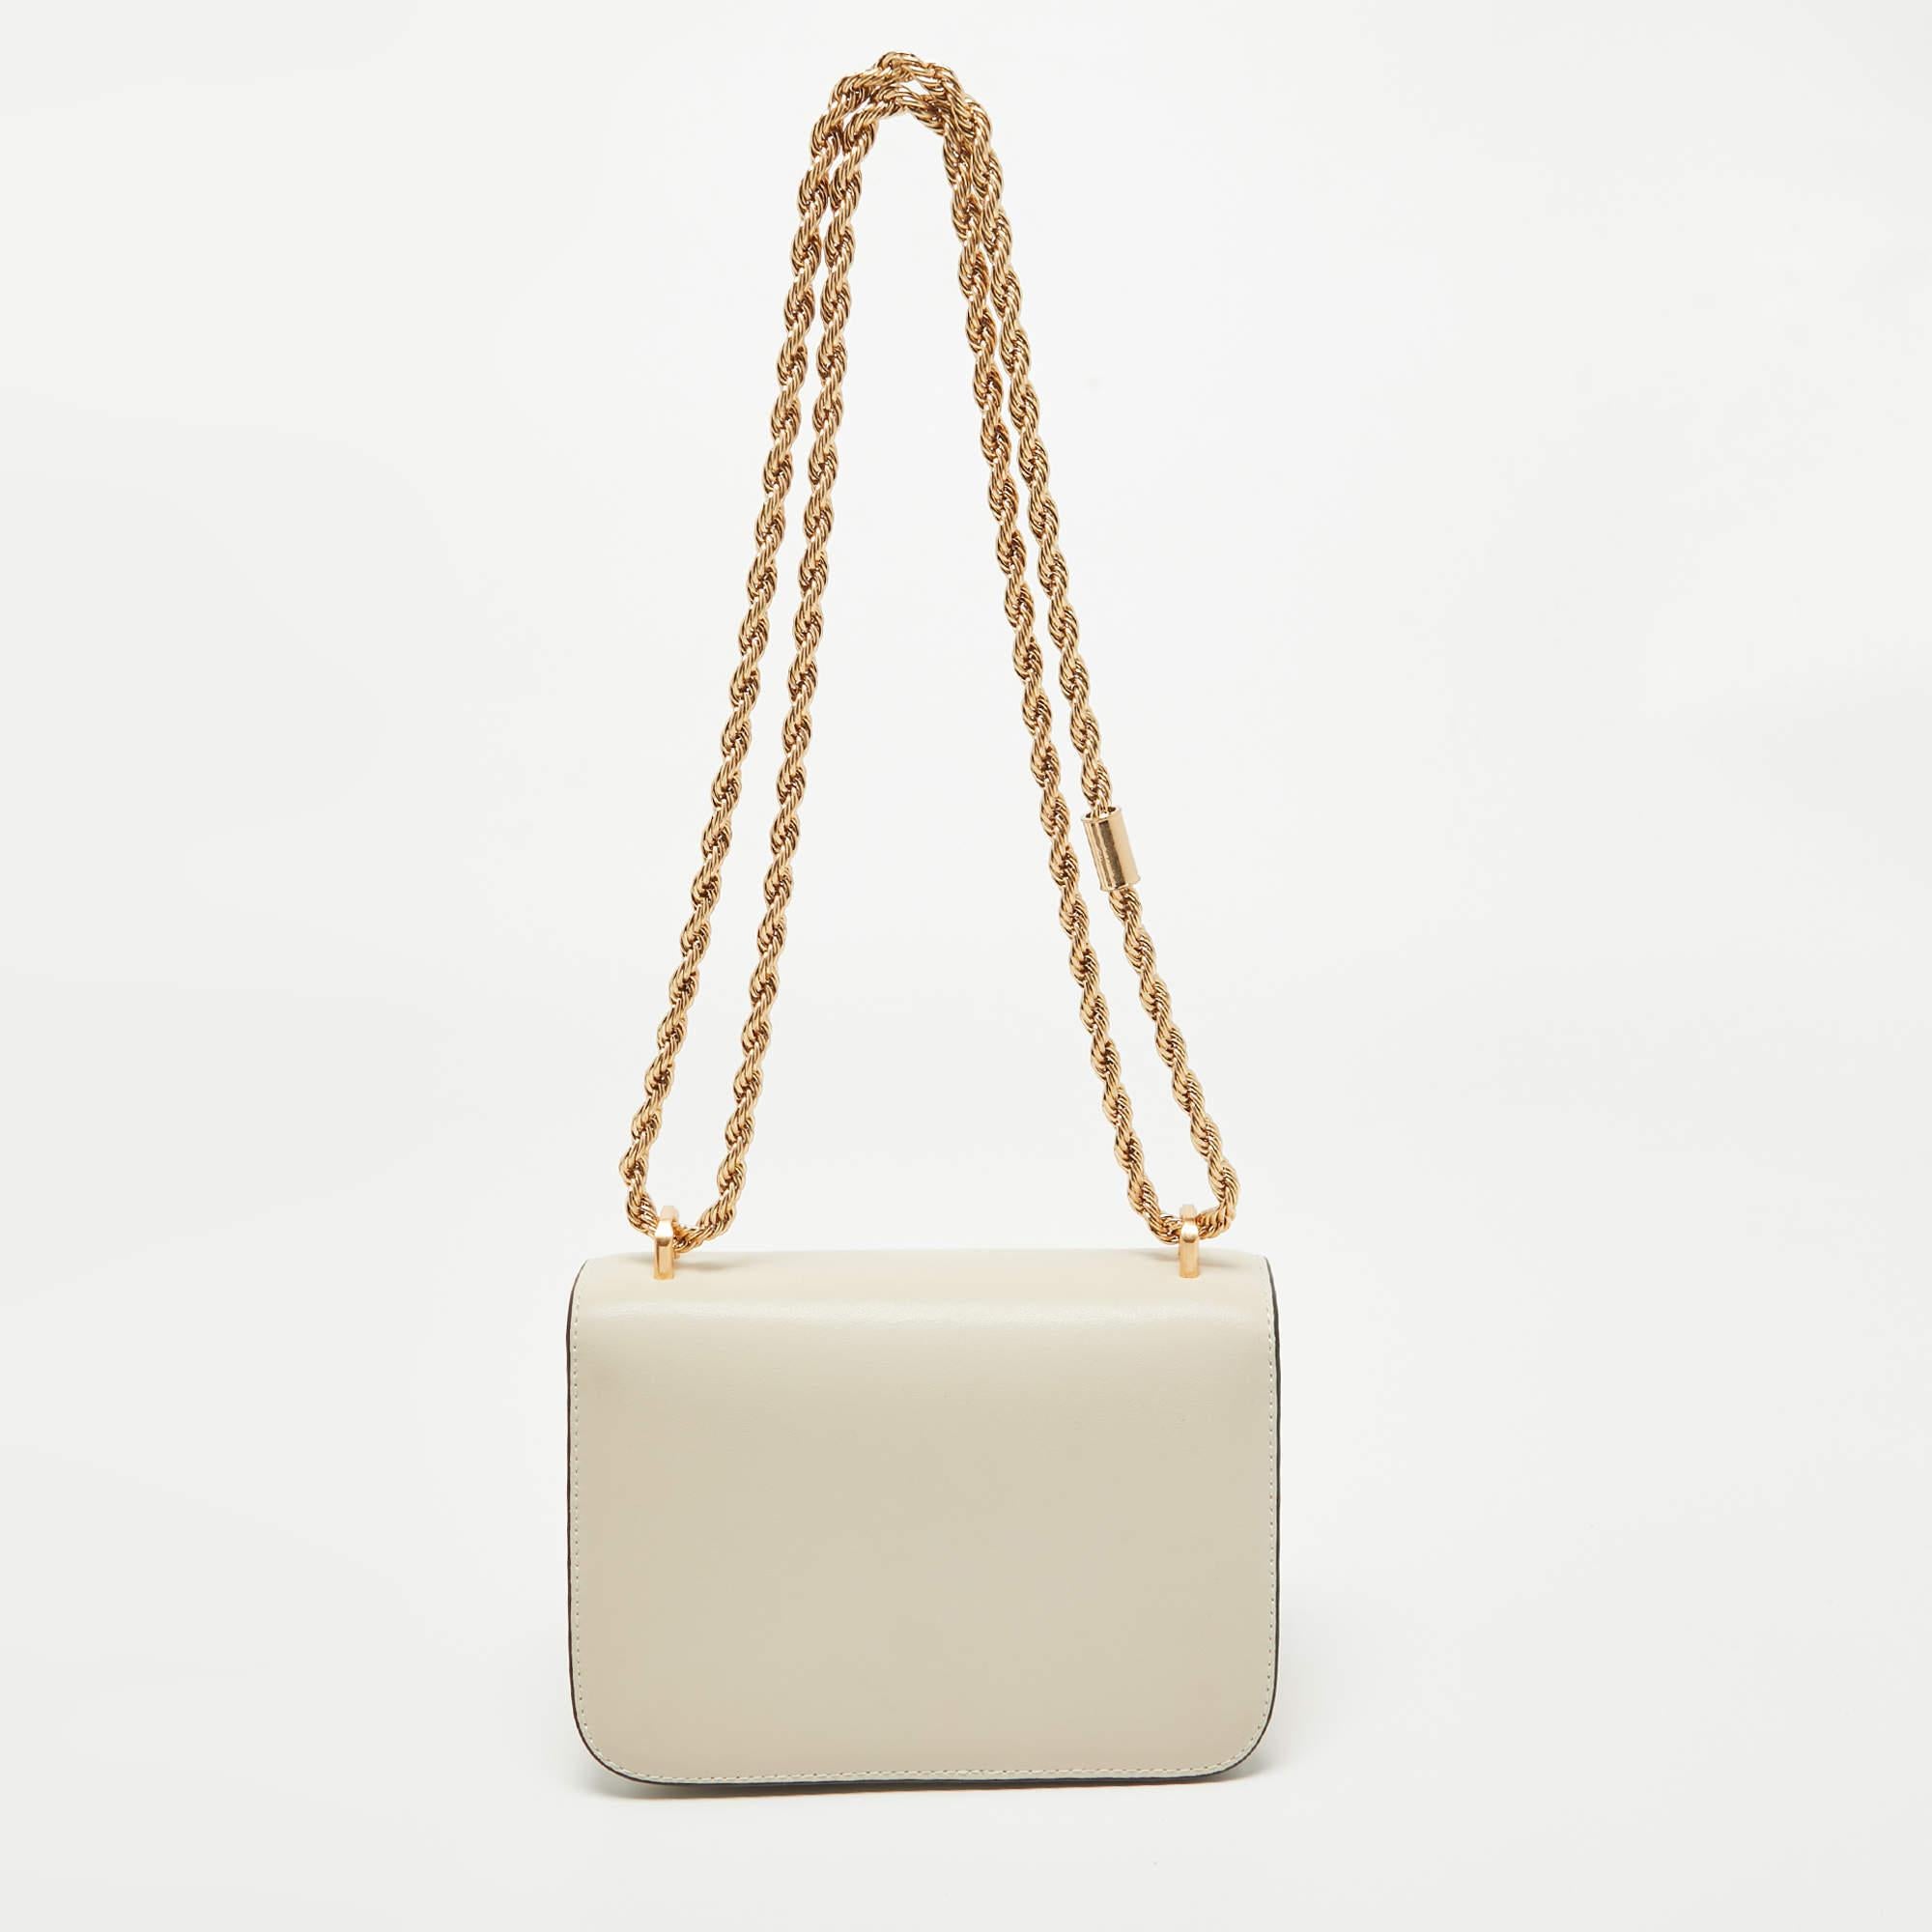 Tory Burch Light Beige Leather Small Eleanor Shoulder Bag 5